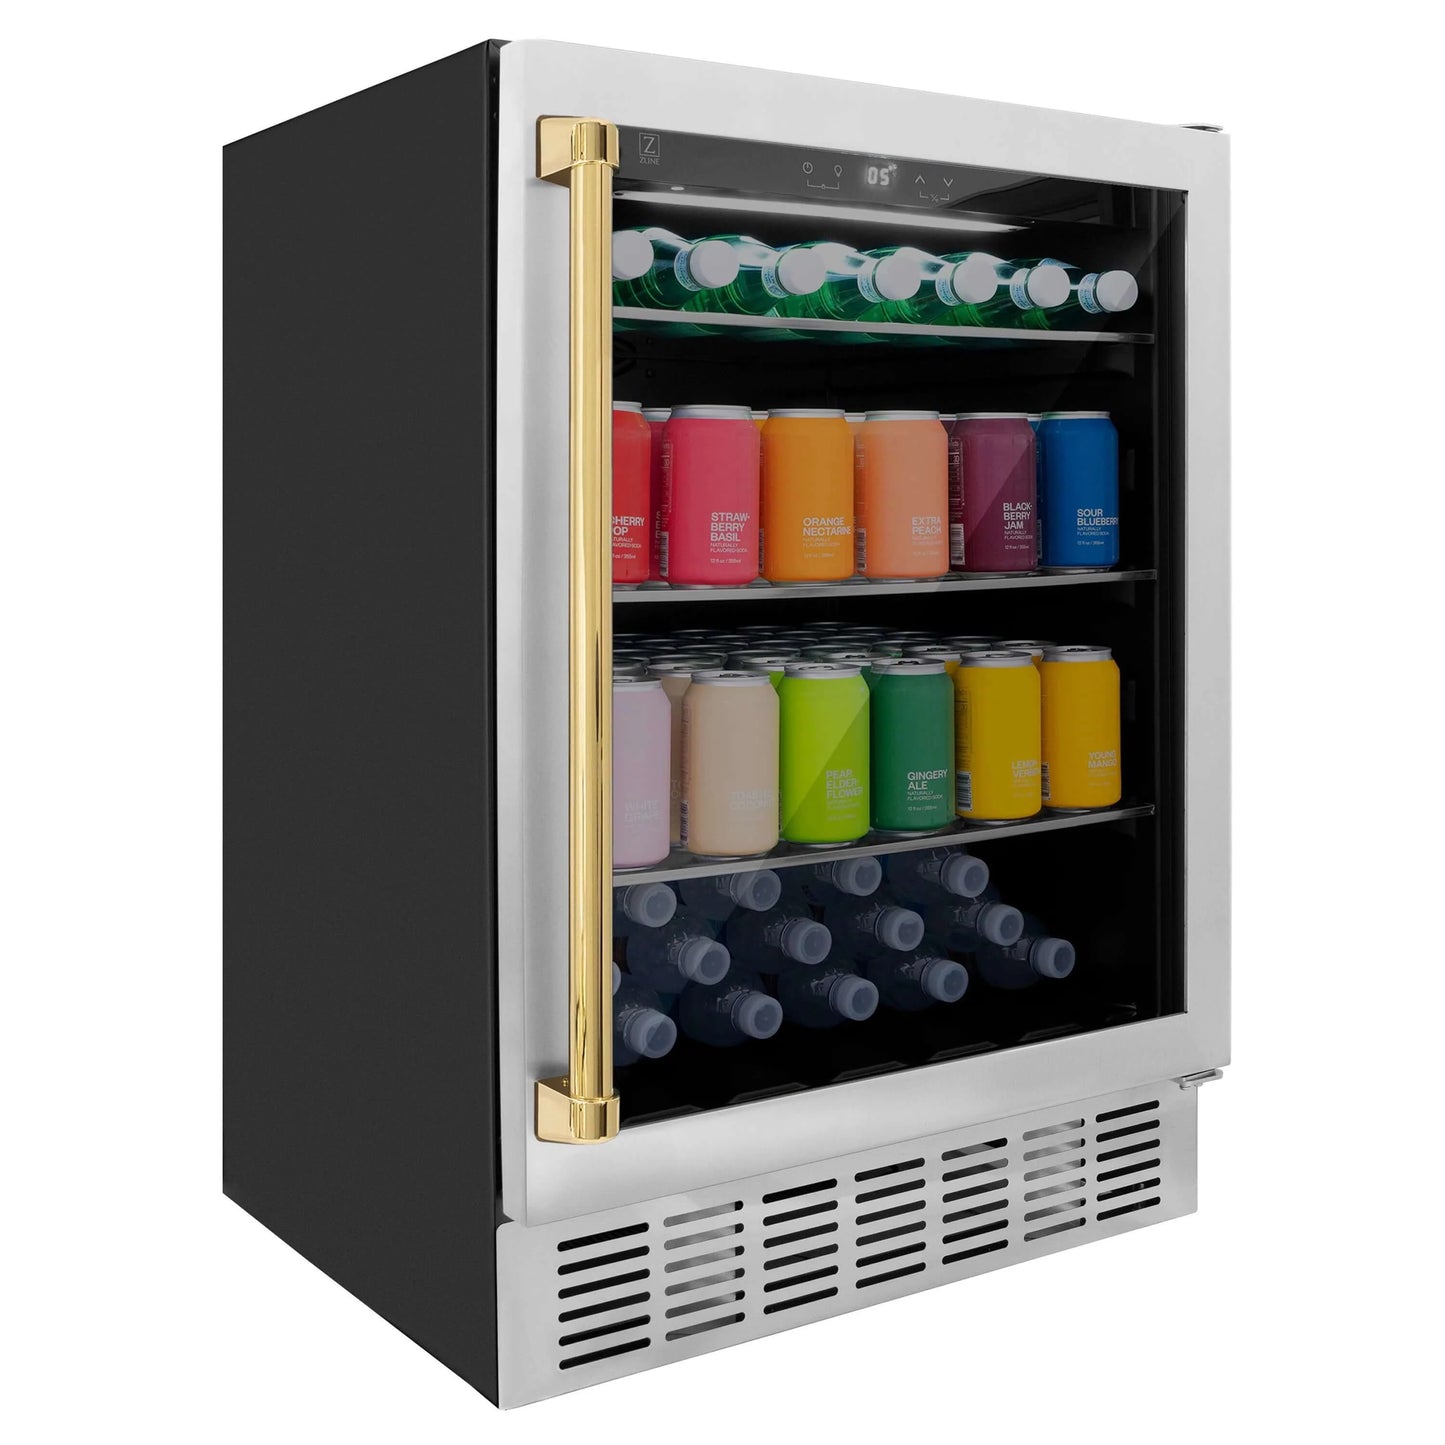 ZLINE 24" Monument Autograph Edition 154 Can Beverage Fridge in Stainless Steel with Polished Gold Accents (RBVZ-US-24-G)